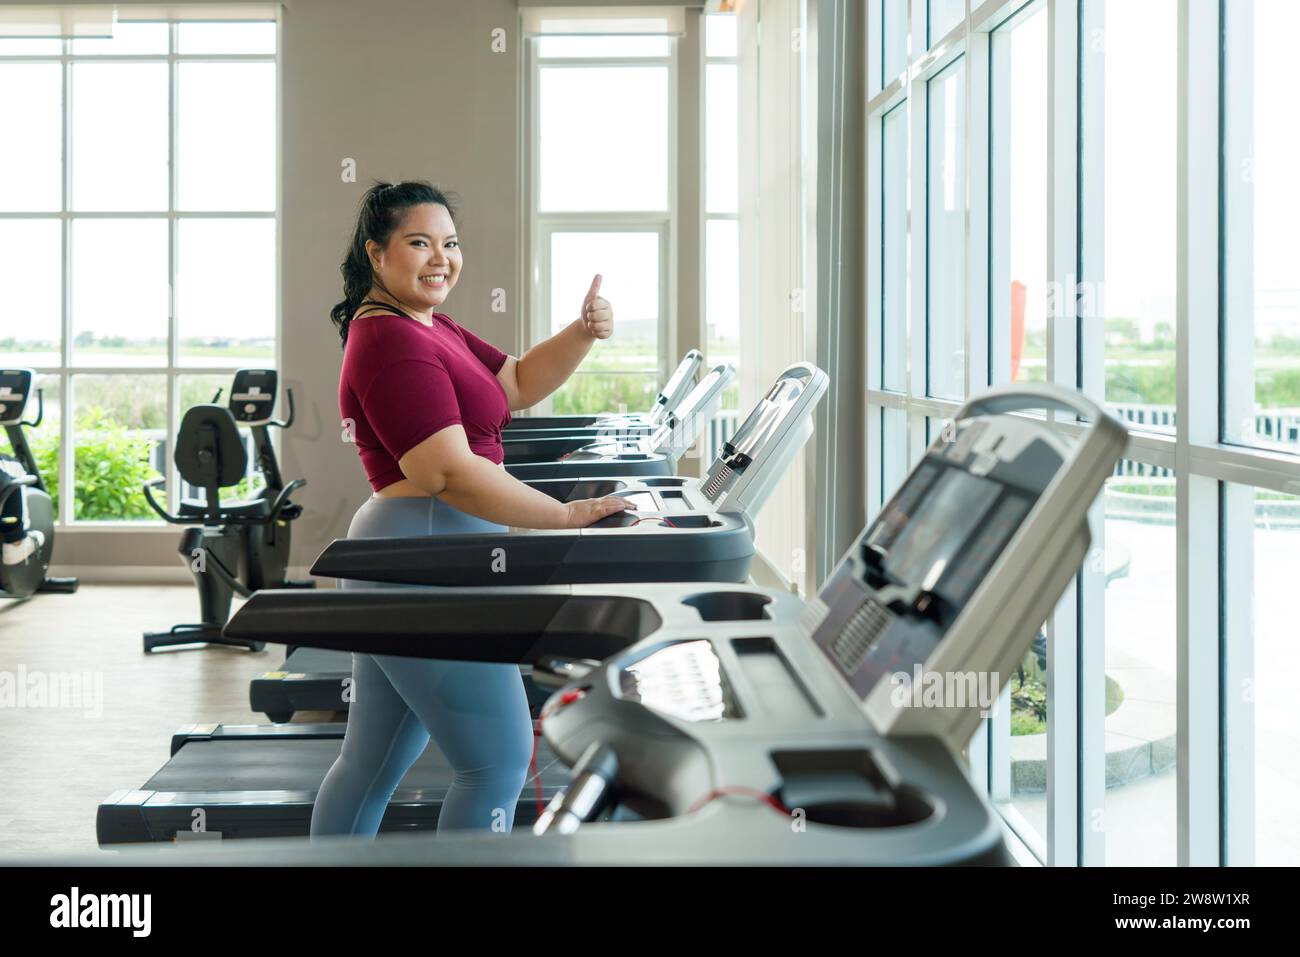 A plus-sized woman is standing on a treadmill in a gym, preparing to start her exercise routine with determination. Stock Photo